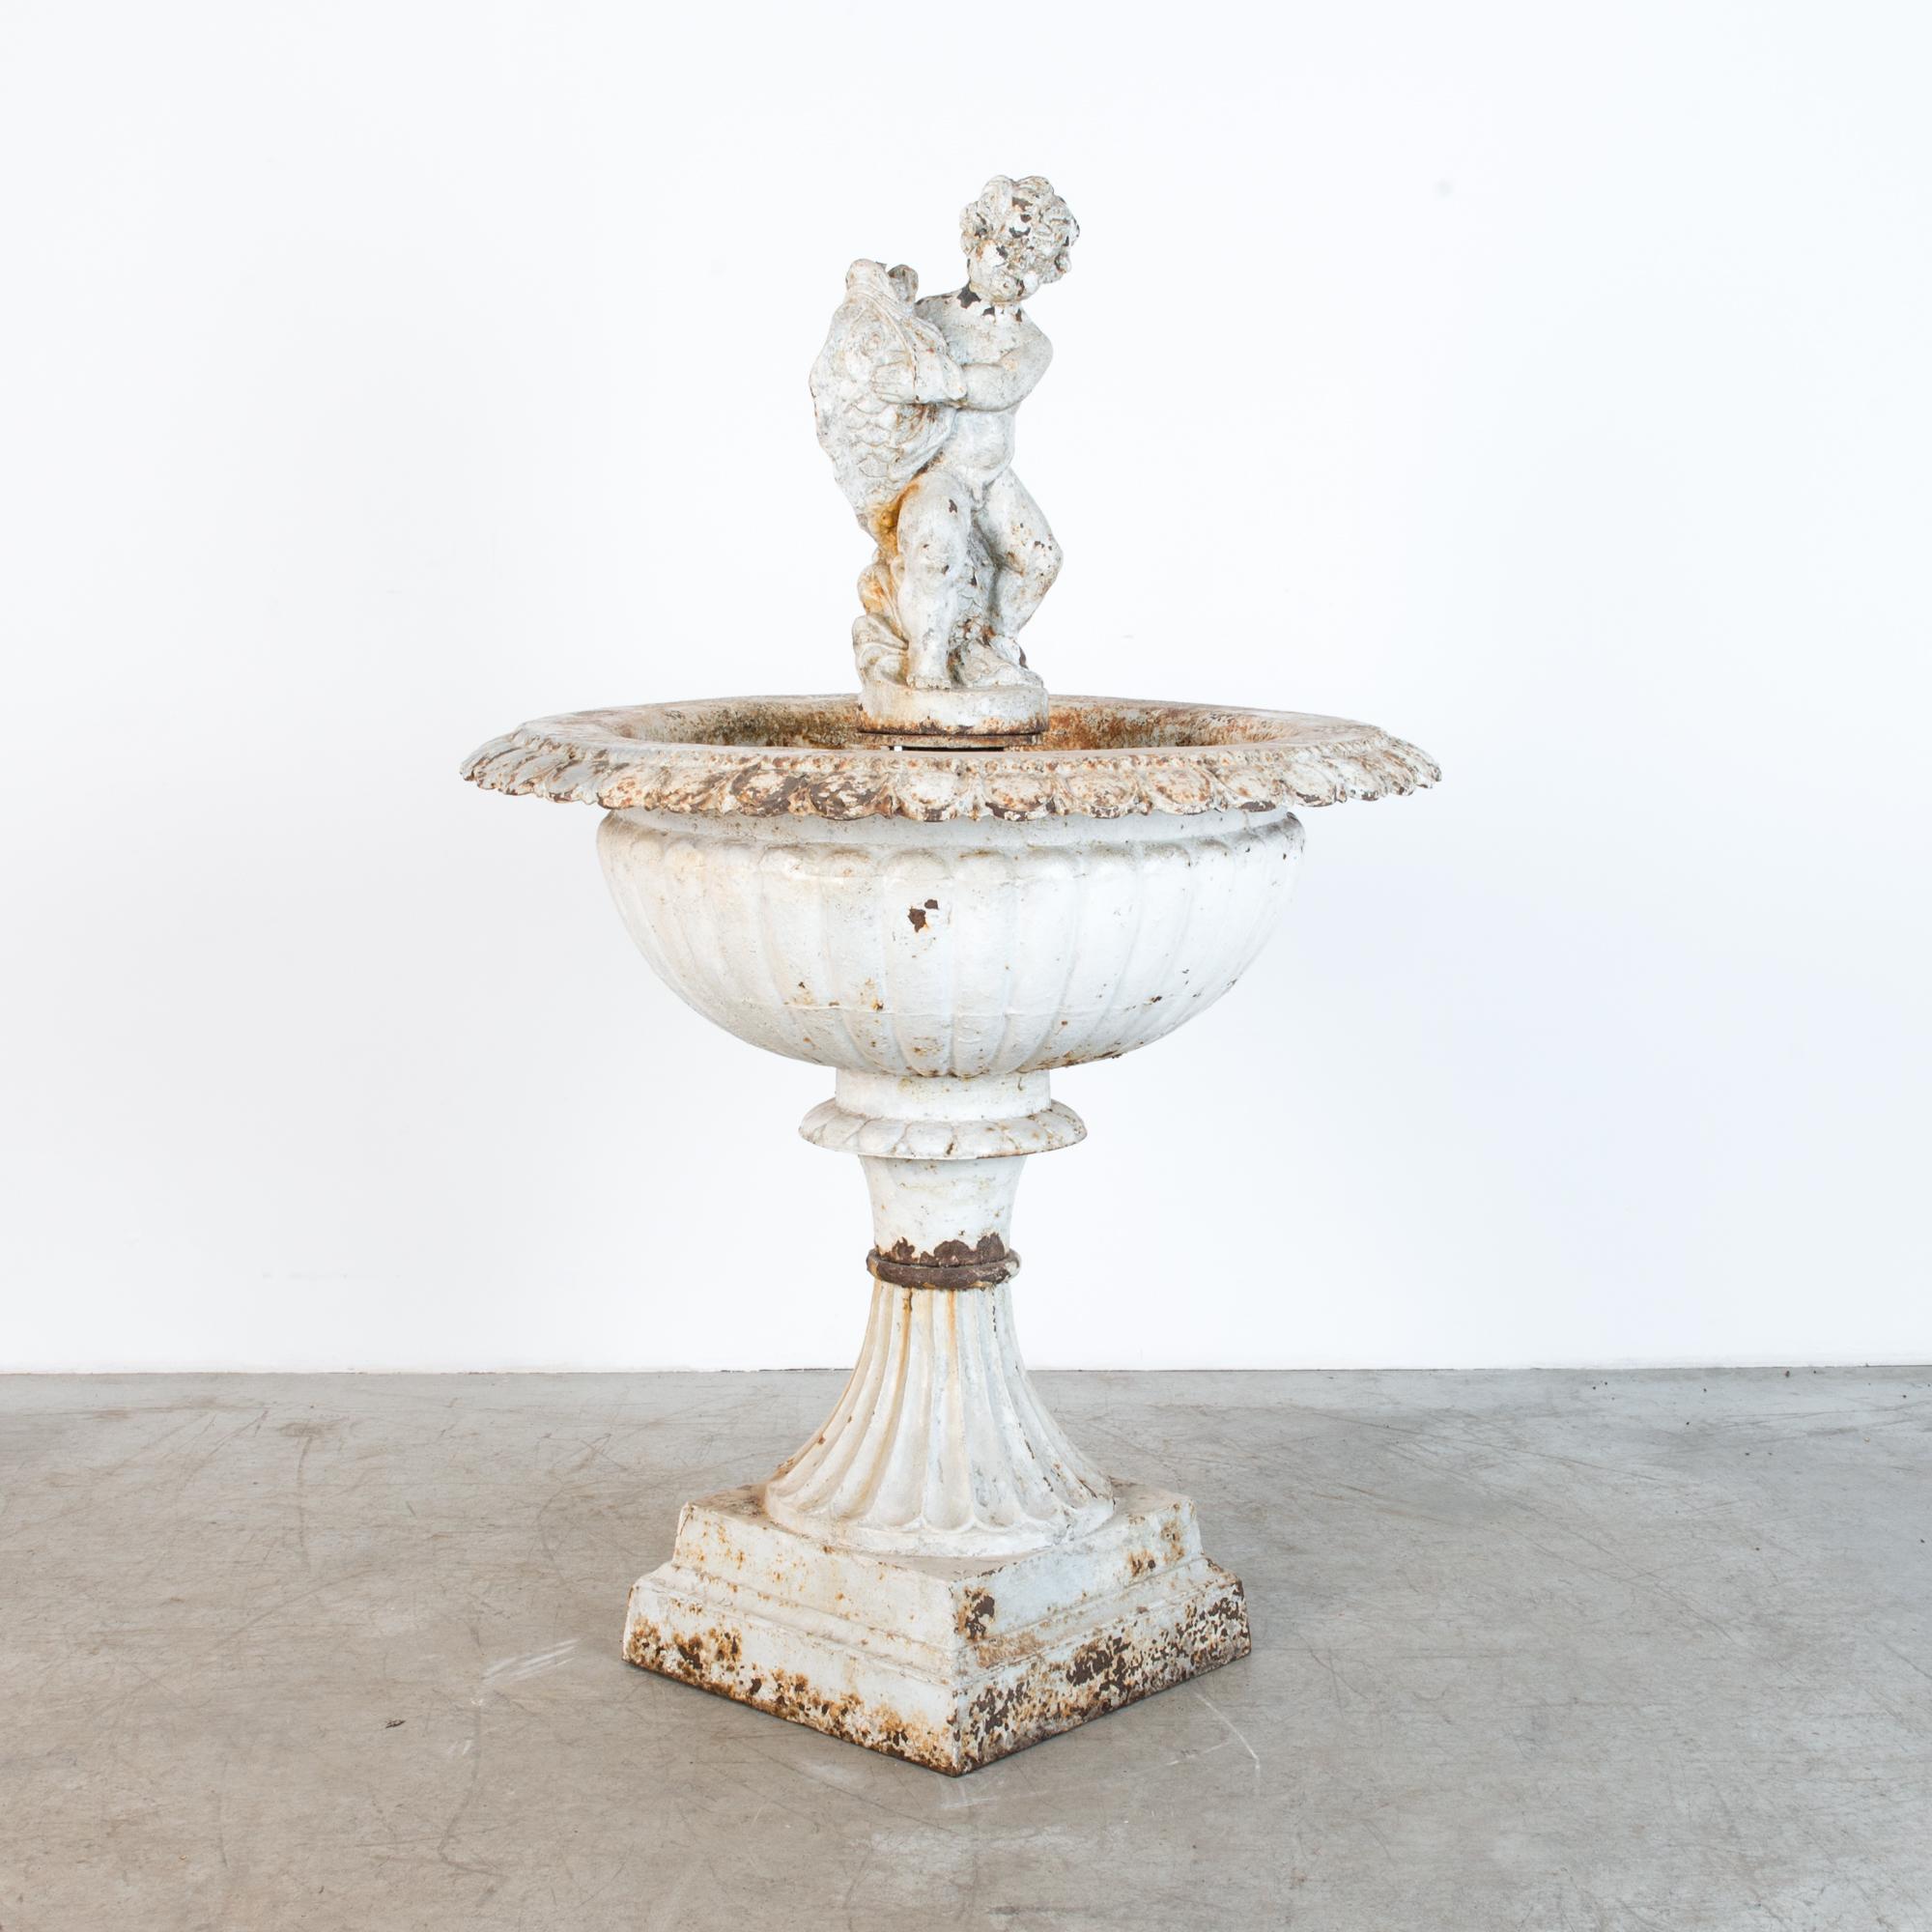 This large fountain, at 58” high, is built from three cast iron parts, in oxidised white finish from France, circa 20th century. In a French Baroque style, this large urn features decorative floral details, and figurative statue, originally fitted